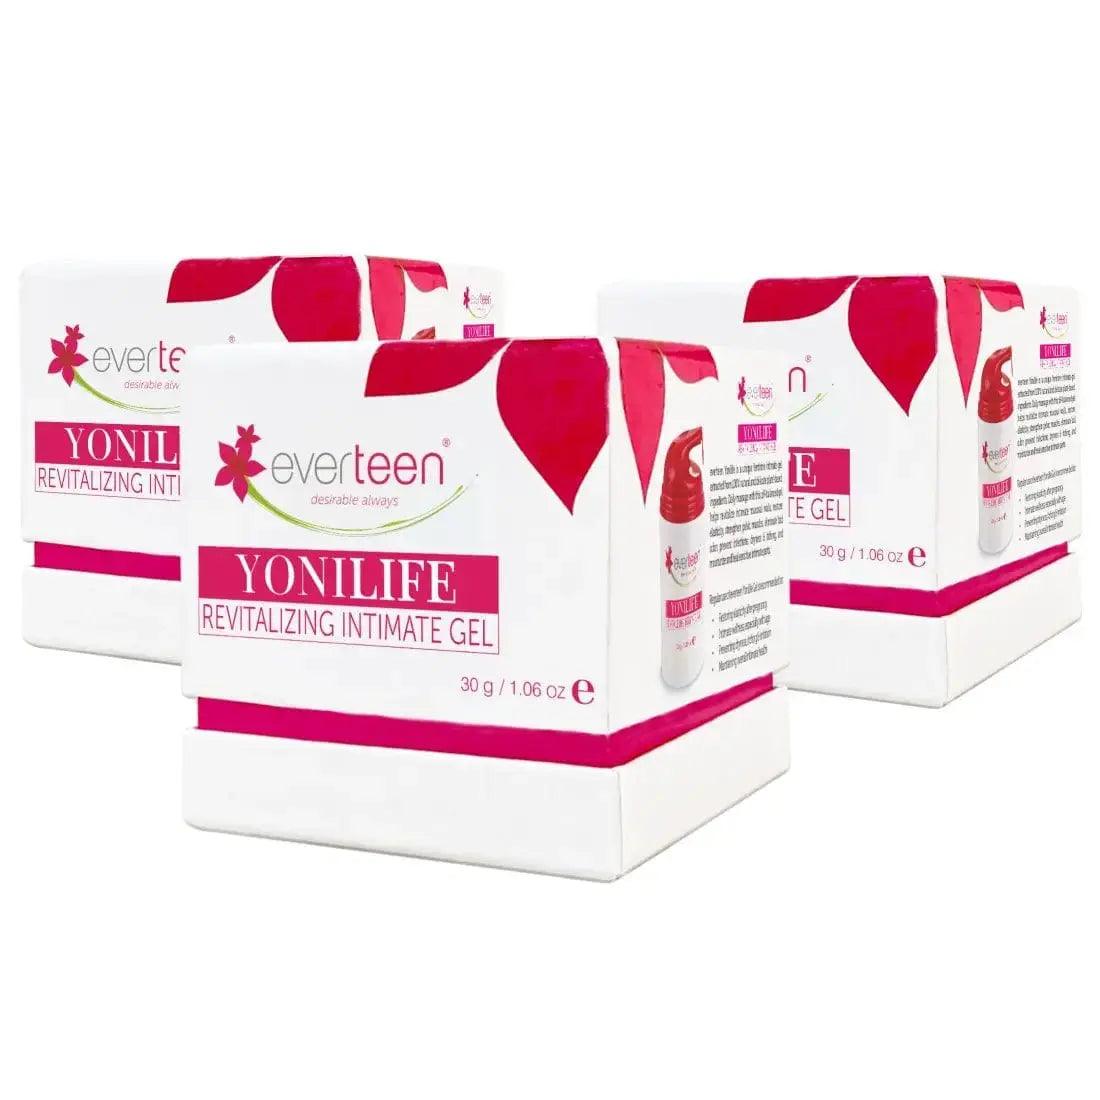 everteen Yonilife Gel for Revitalizing Intimate Parts in Women - 30g 9559682308702